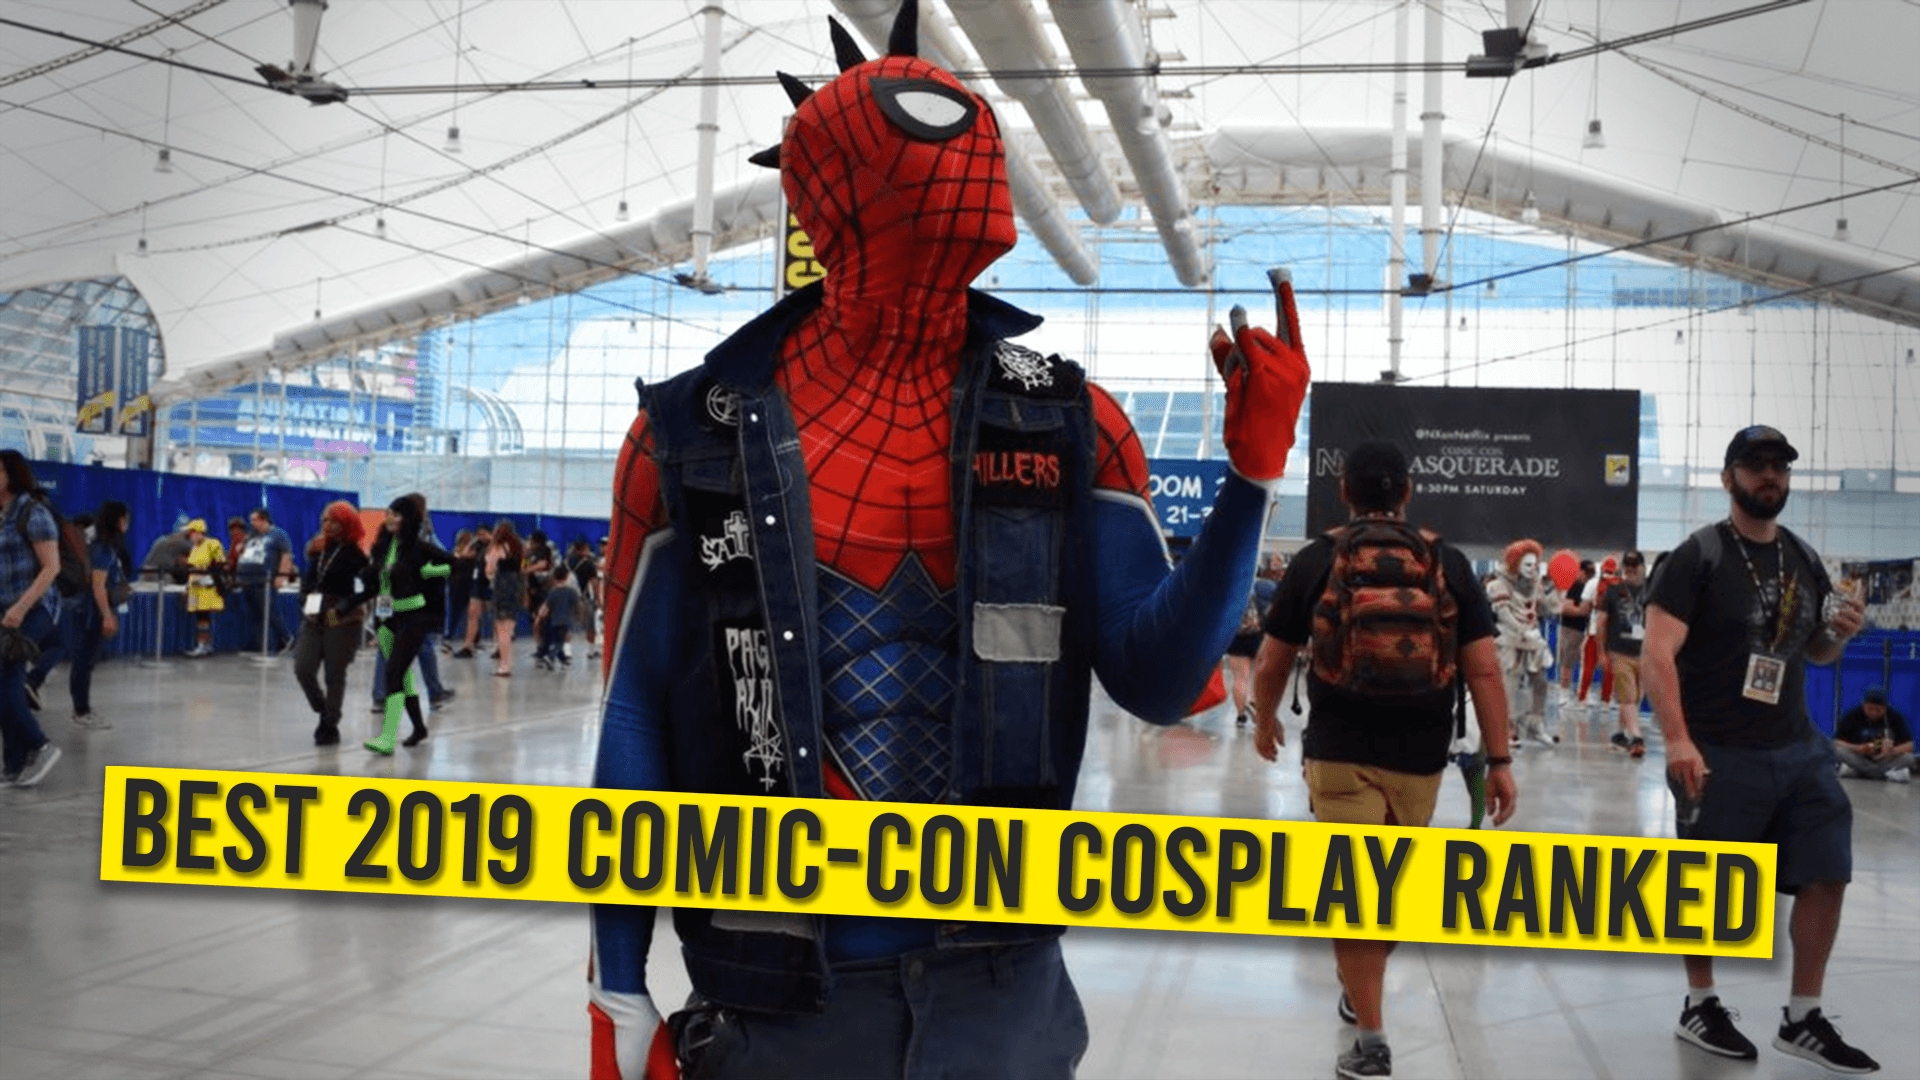 Best 2019 Comic-Con Cosplay Ranked